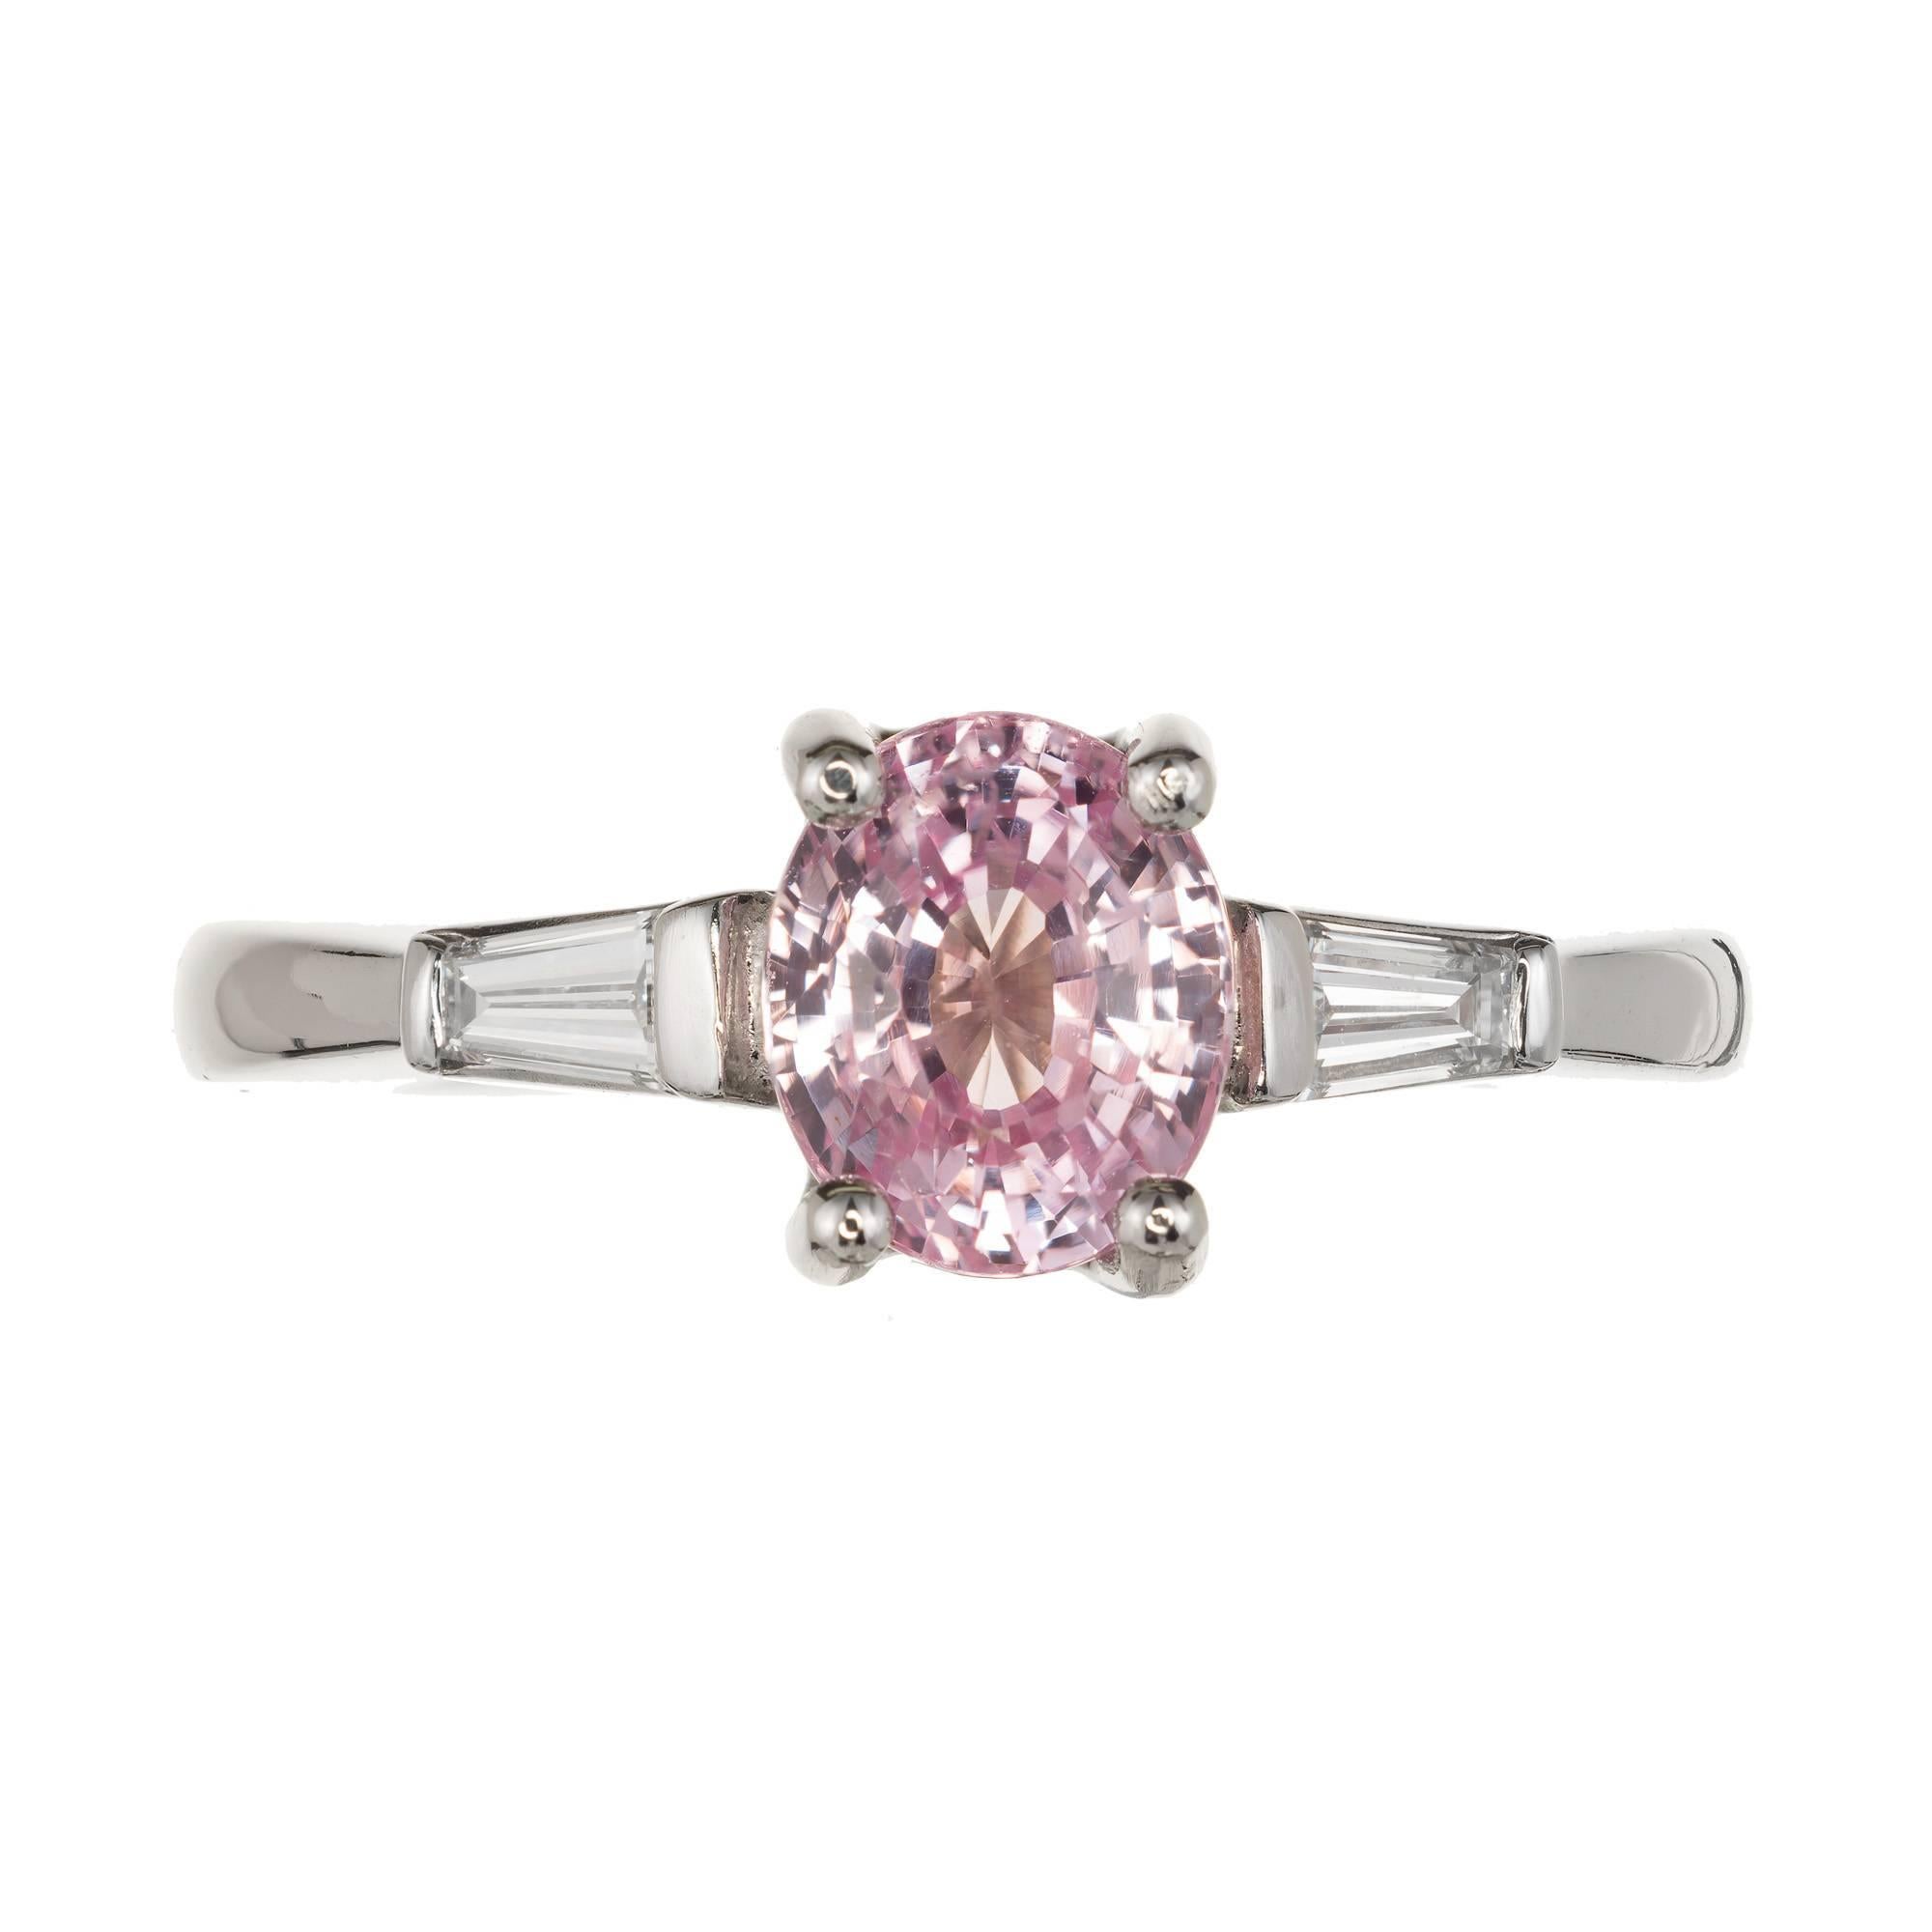 1950's Natural oval pink sapphire and baguette diamond engagement ring. Platinum three-stone setting with tapered baguette sides and a super bright oval natural old European cut pink Sapphire with a hint of purple from Sri Lanka. 

1 oval pink